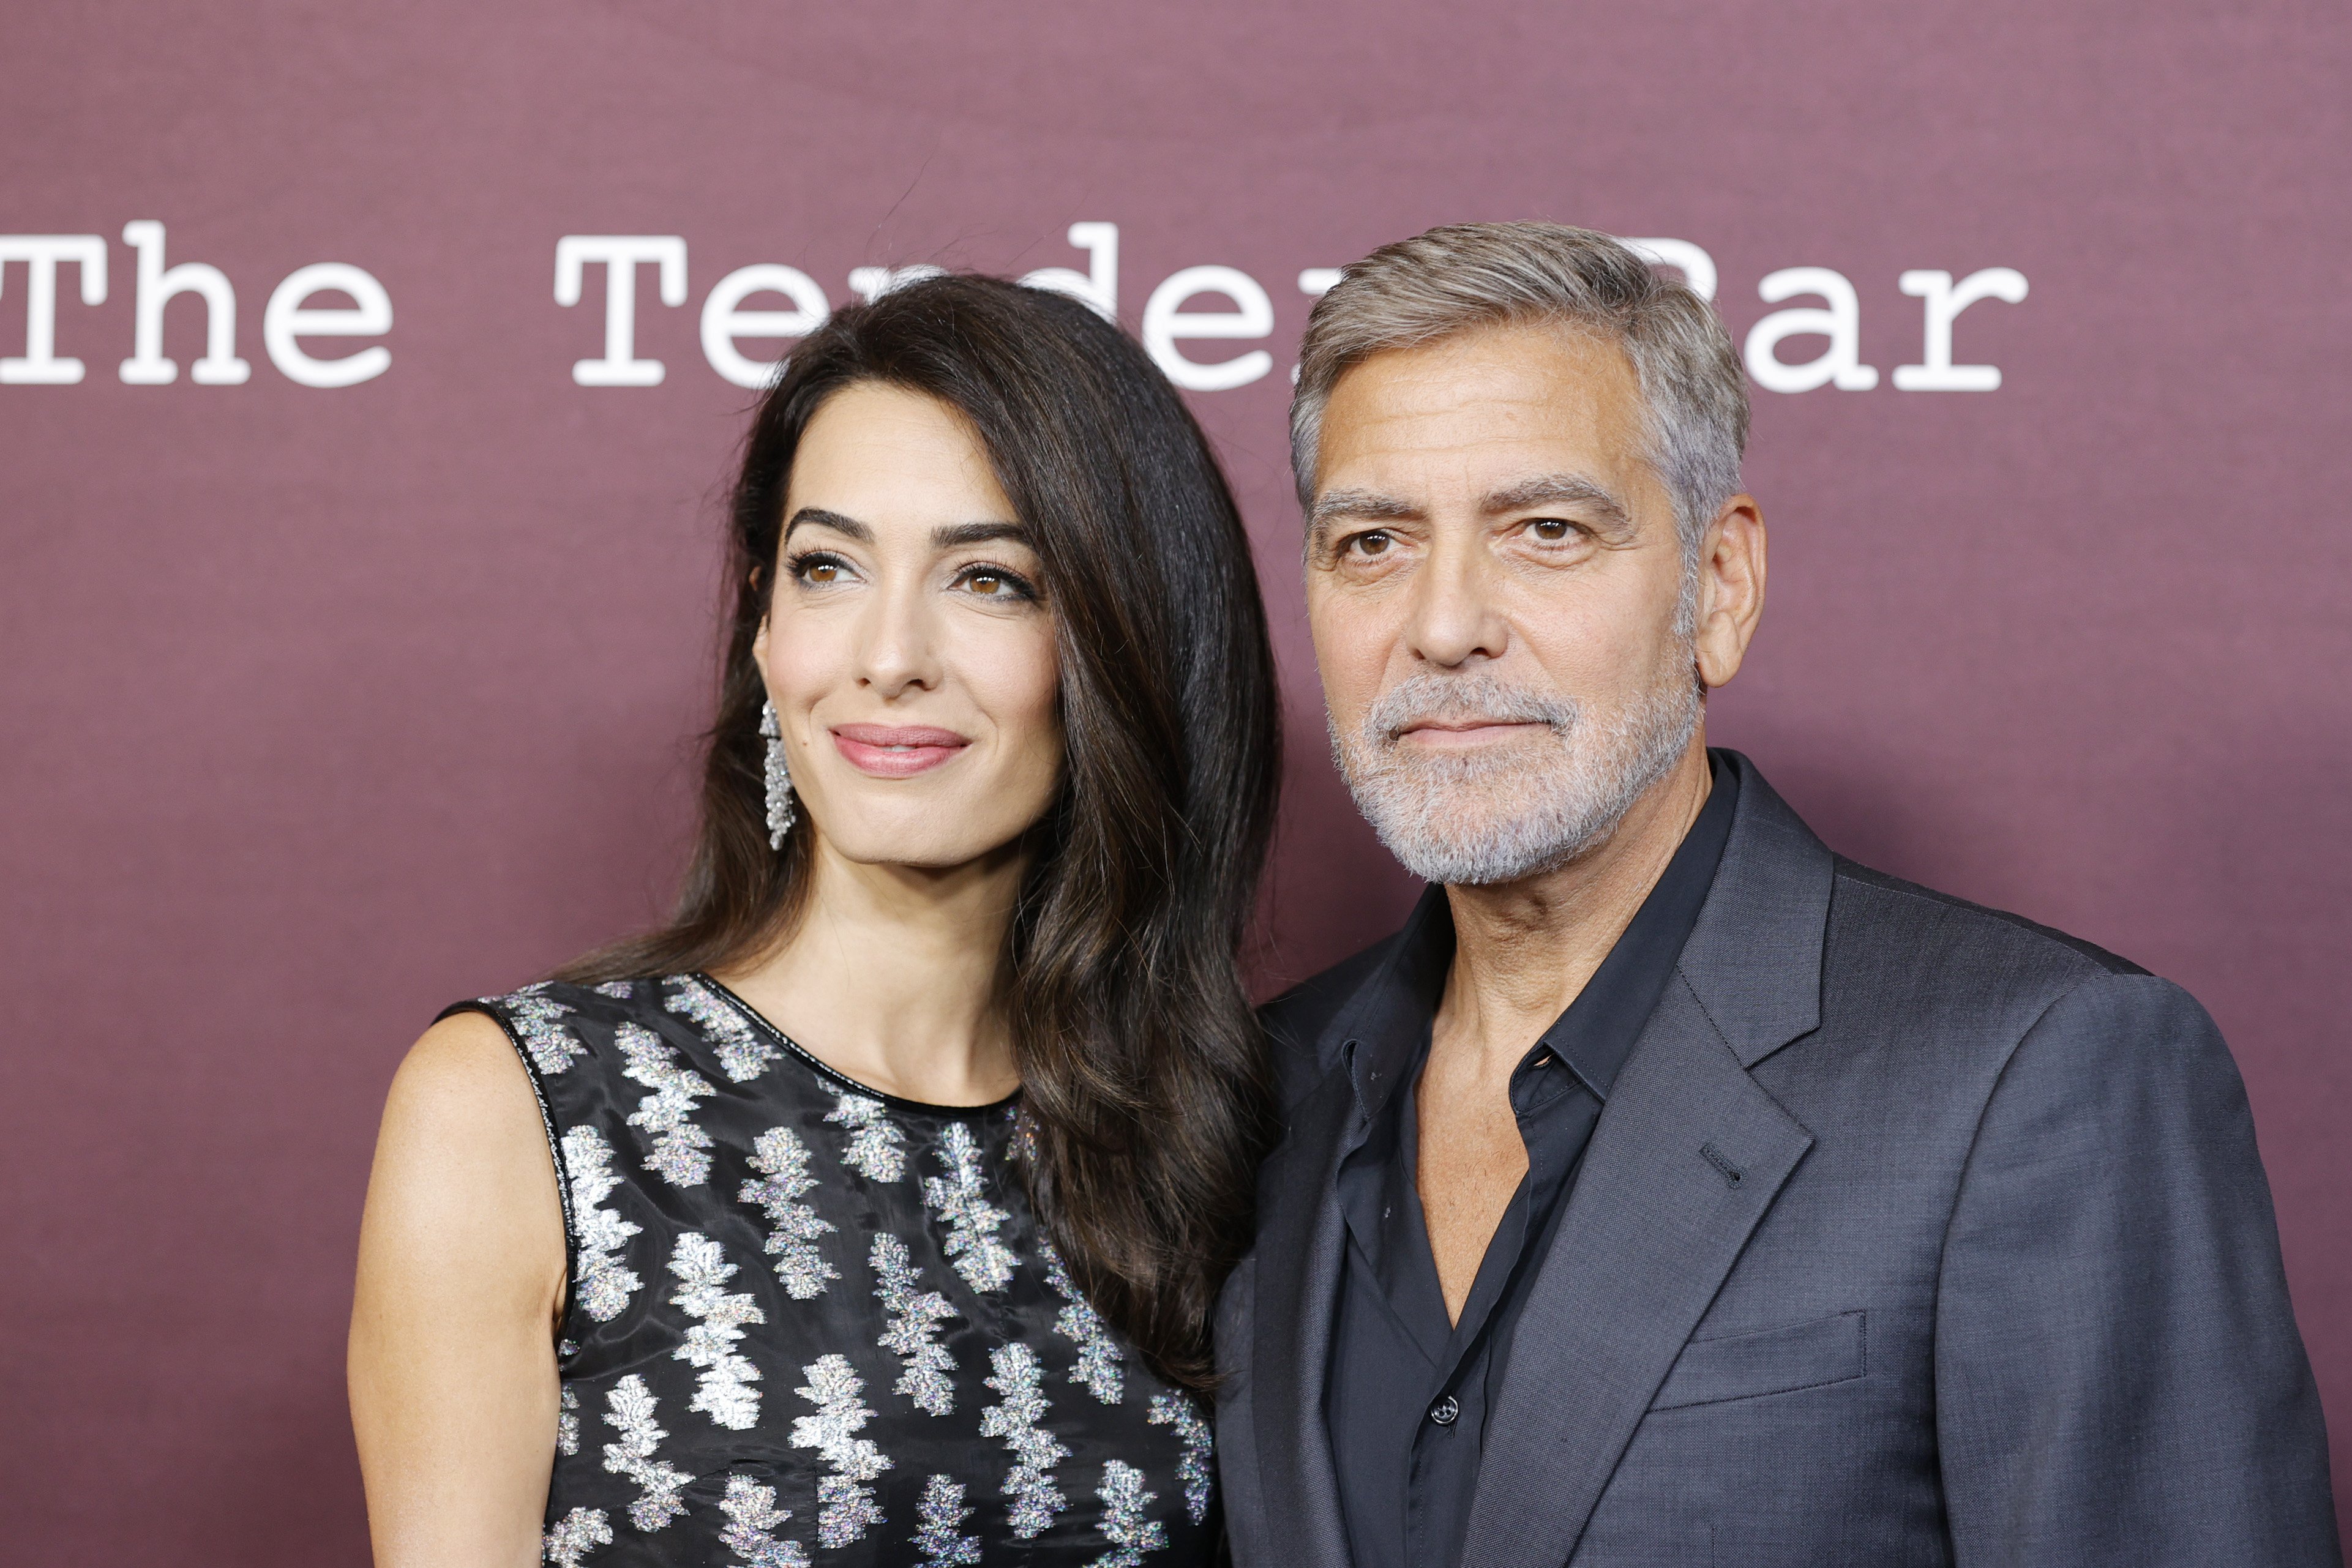 Amal Clooney and husband George Clooney attend the Los Angeles premiere of "The Tender Bar" at DGA Theater Complex on October 03, 2021 in Los Angeles, California. / Source: Getty Images